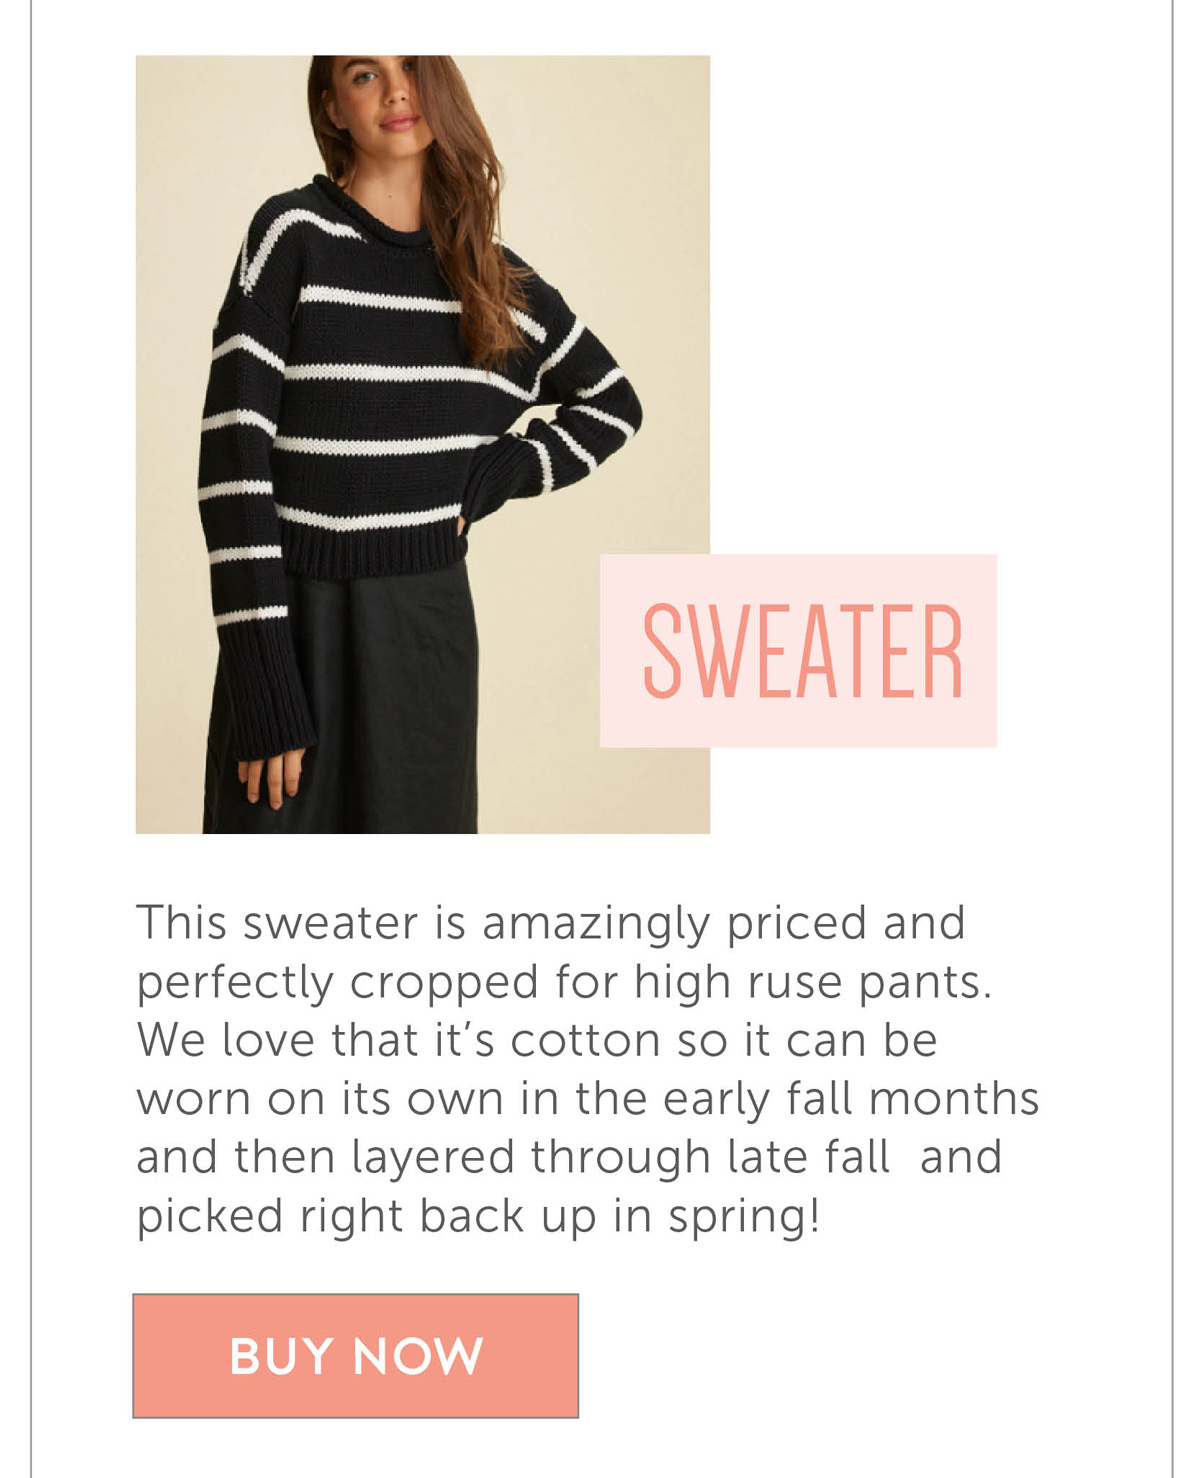 This sweater is amazingly priced and perfectly cropped for high ruse pants. We love that it’s cotton so it can be worn on its own in the early fall months and then layered through late fall and picked right back up in spring!